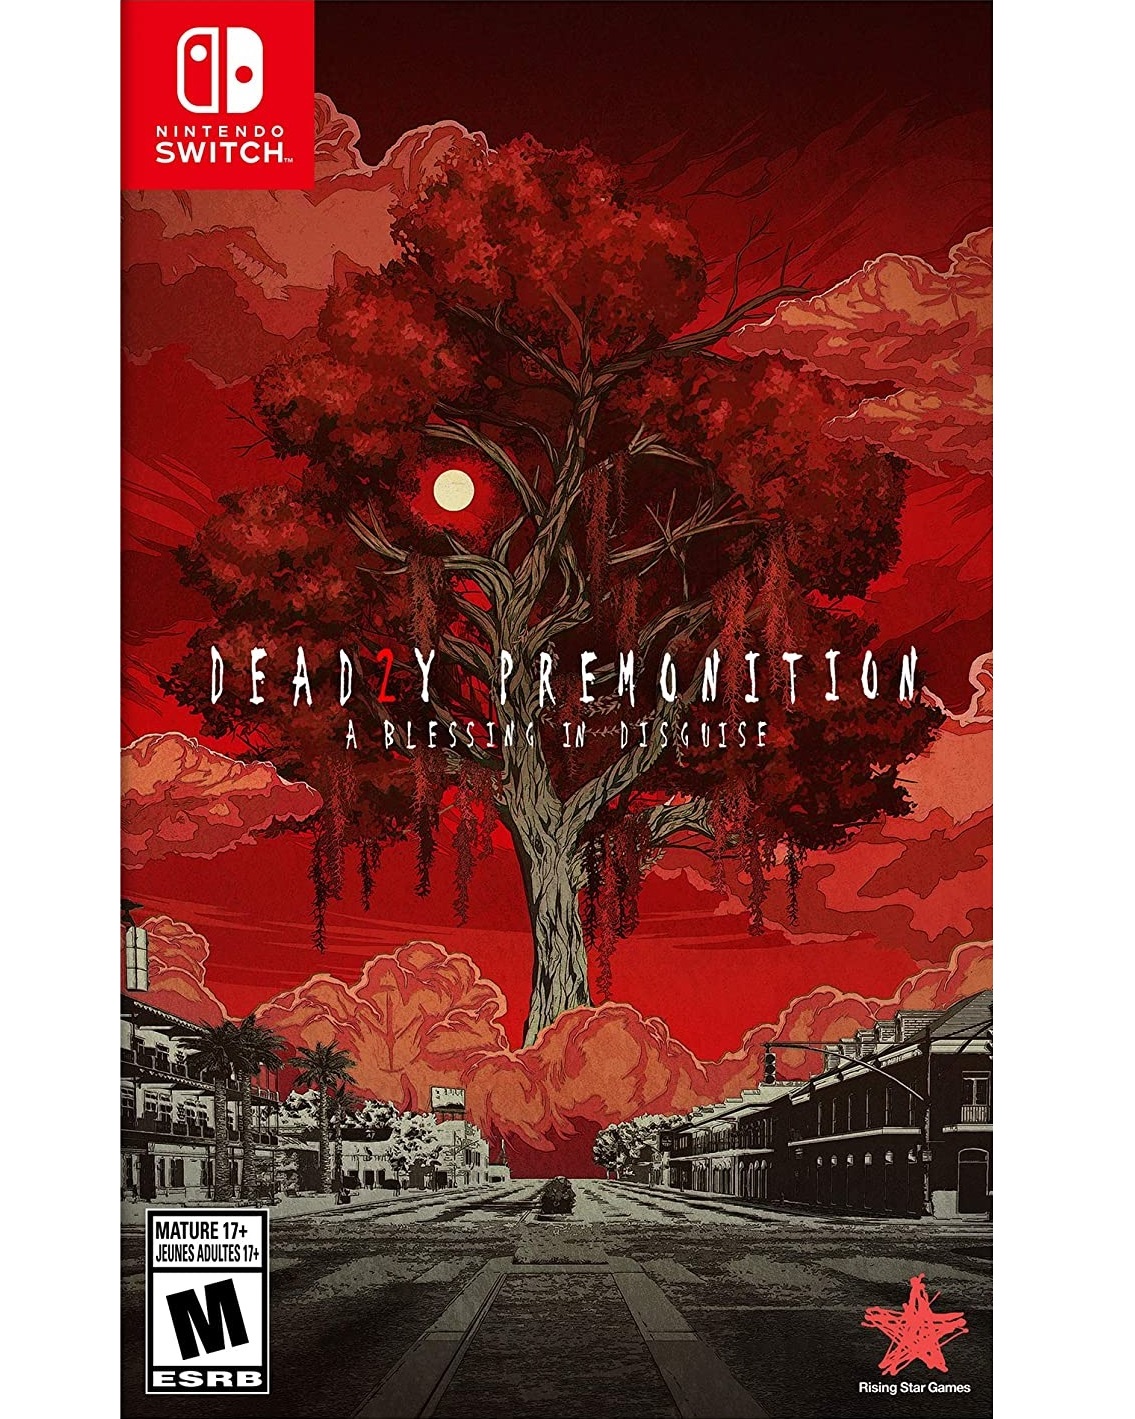 deadly premonition 2 a blessing in disguise pc download free